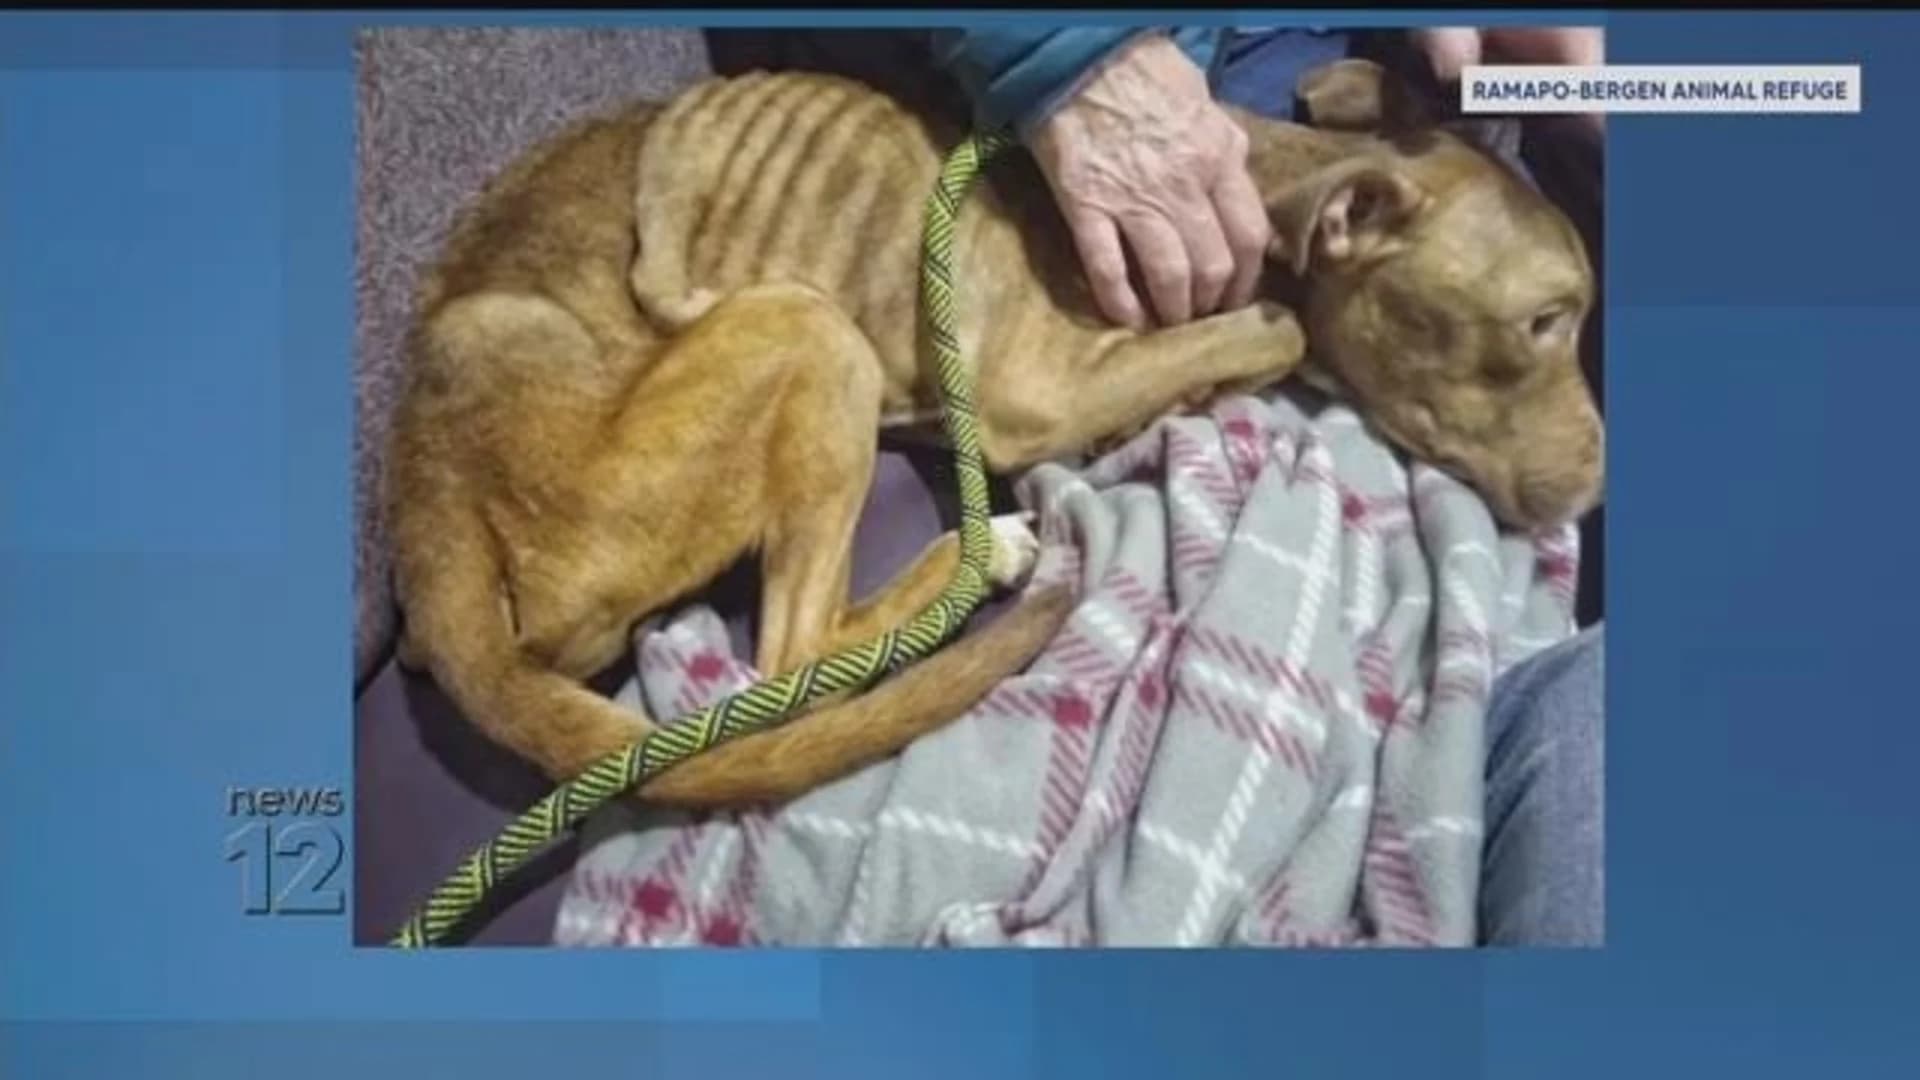 Officials seek donation to help sick dog found dying Sunday night